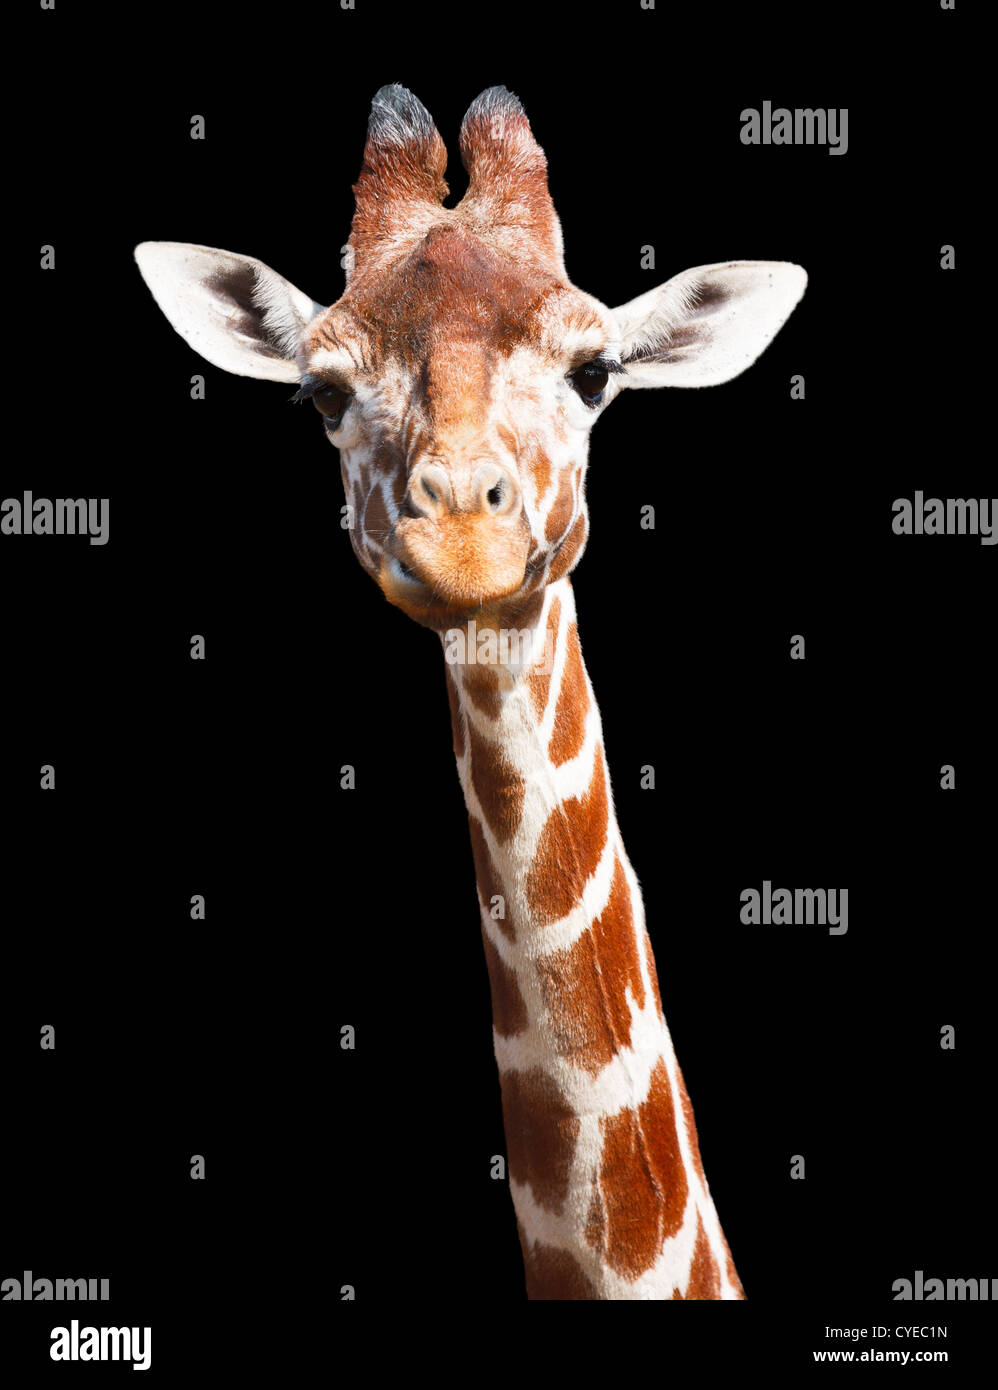 Giraffe head and neck isolated against a black background with clipping path Stock Photo